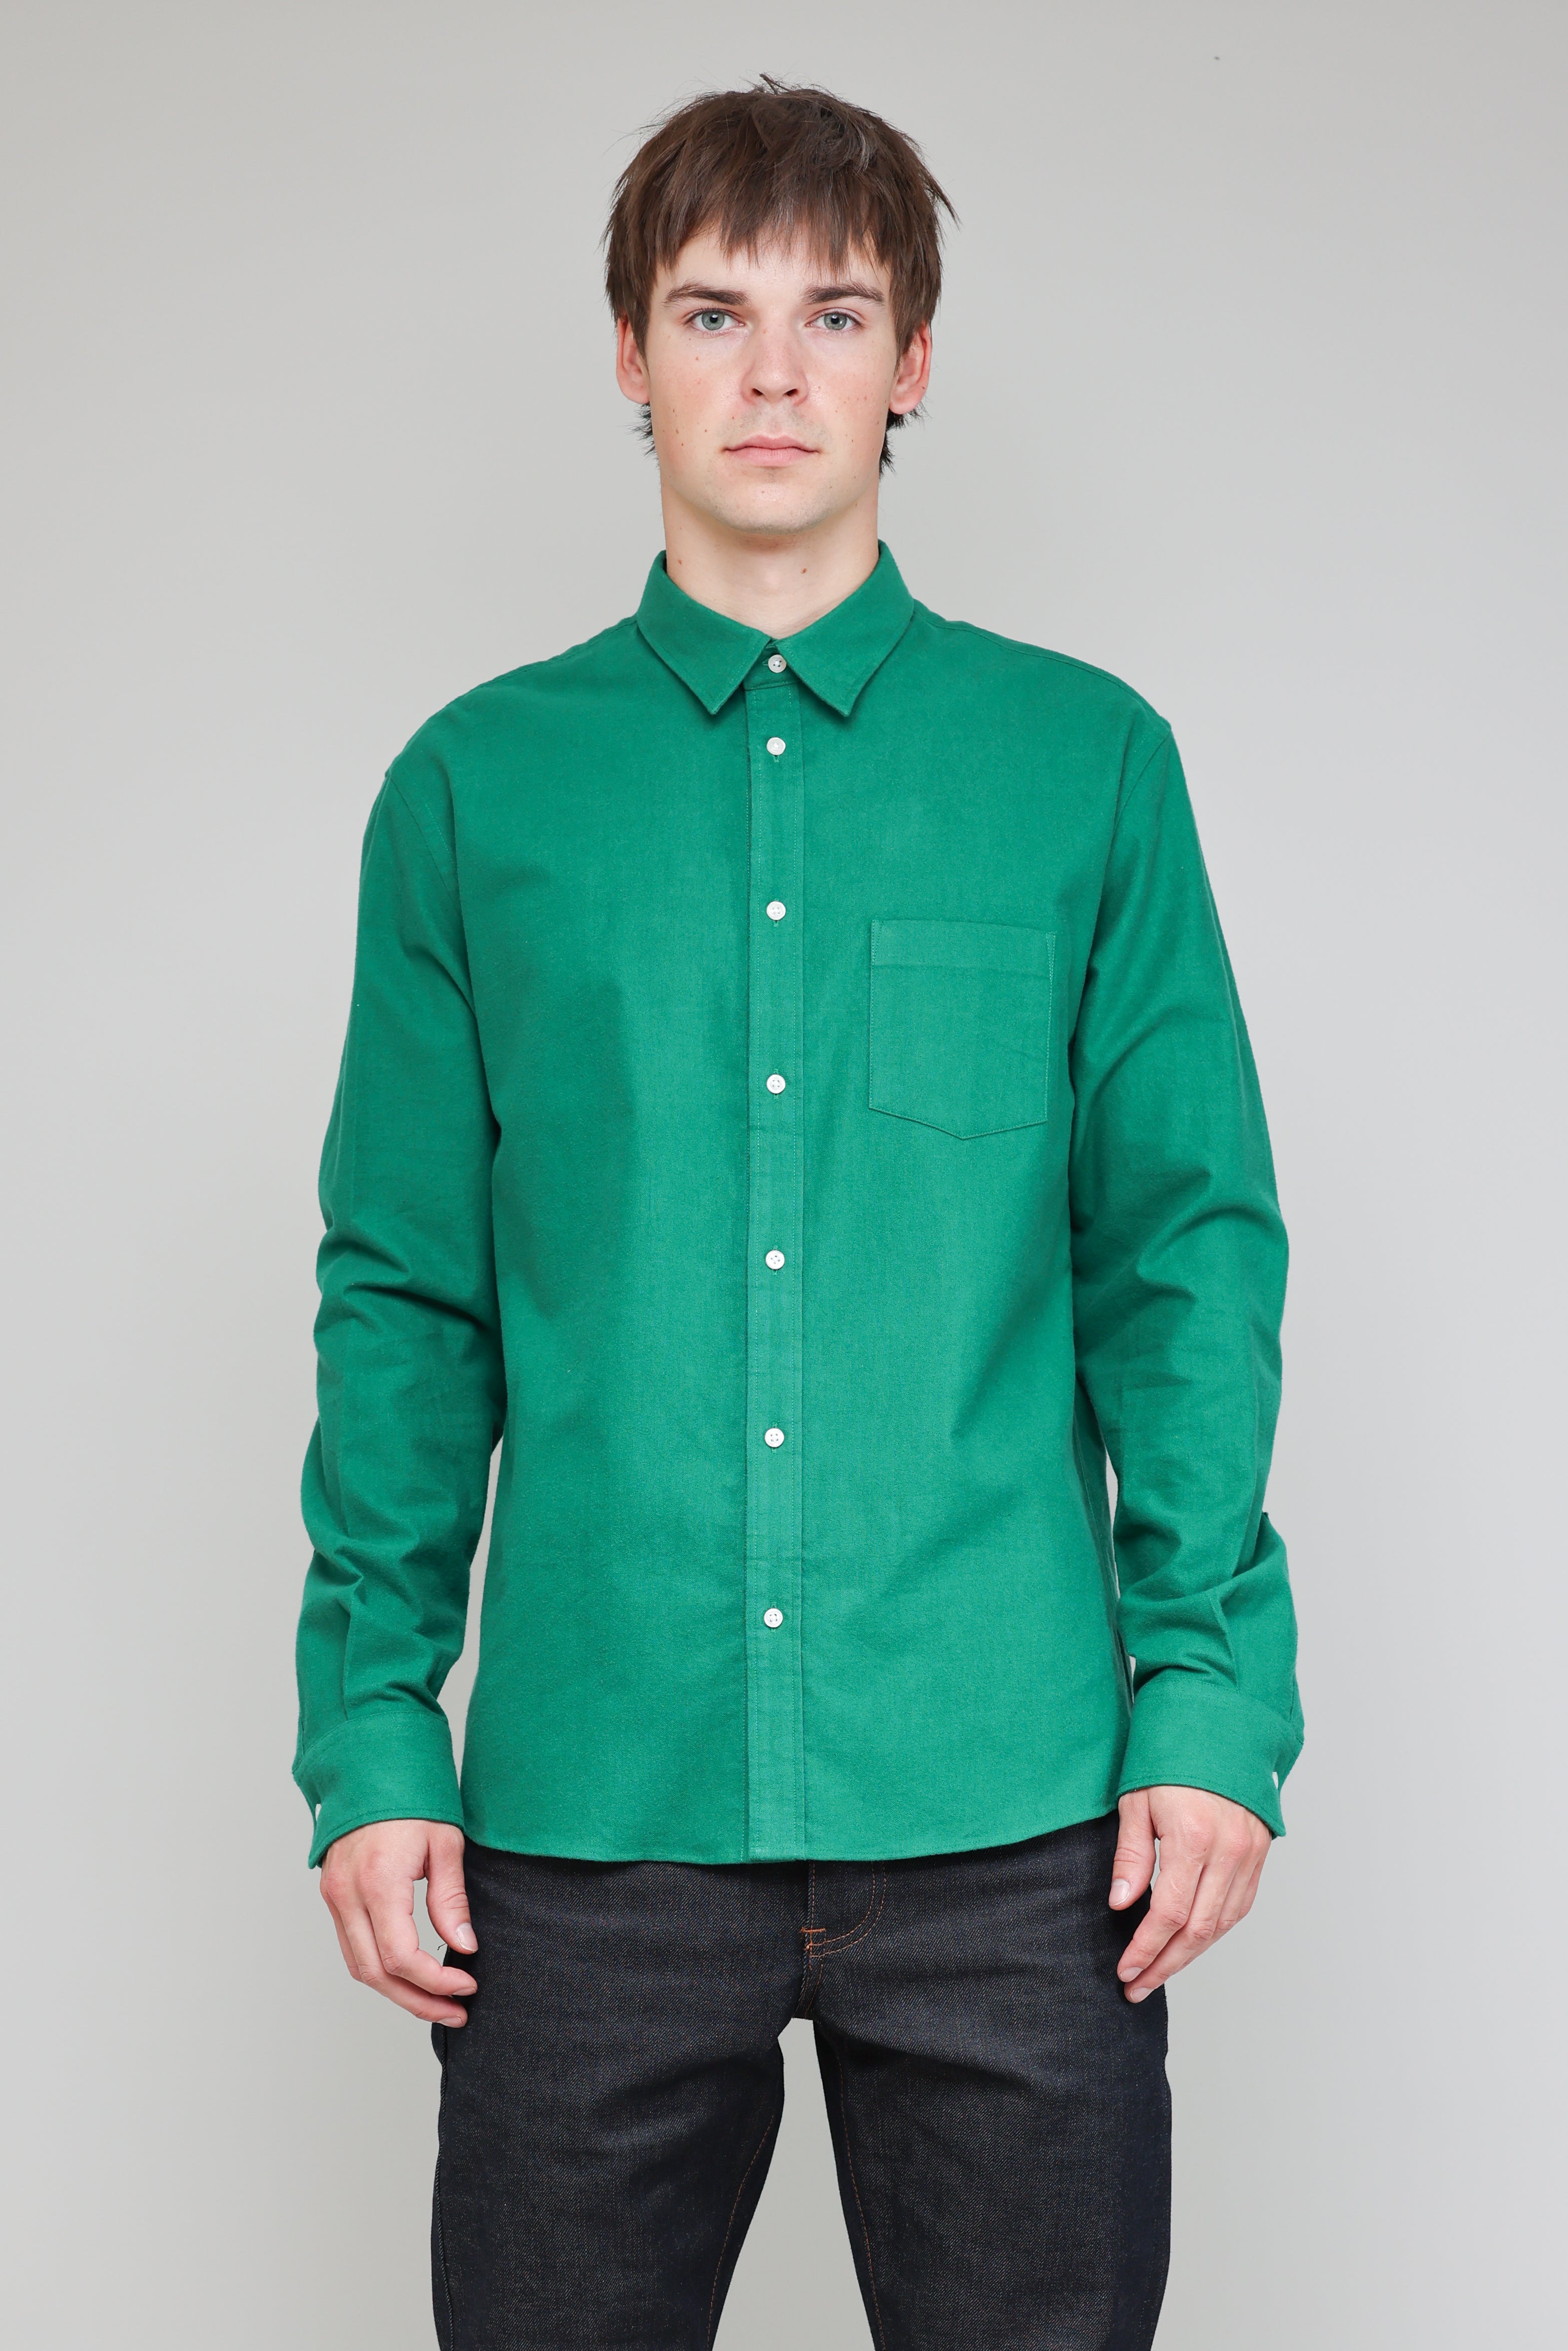 Japanese Flannel in Green 02